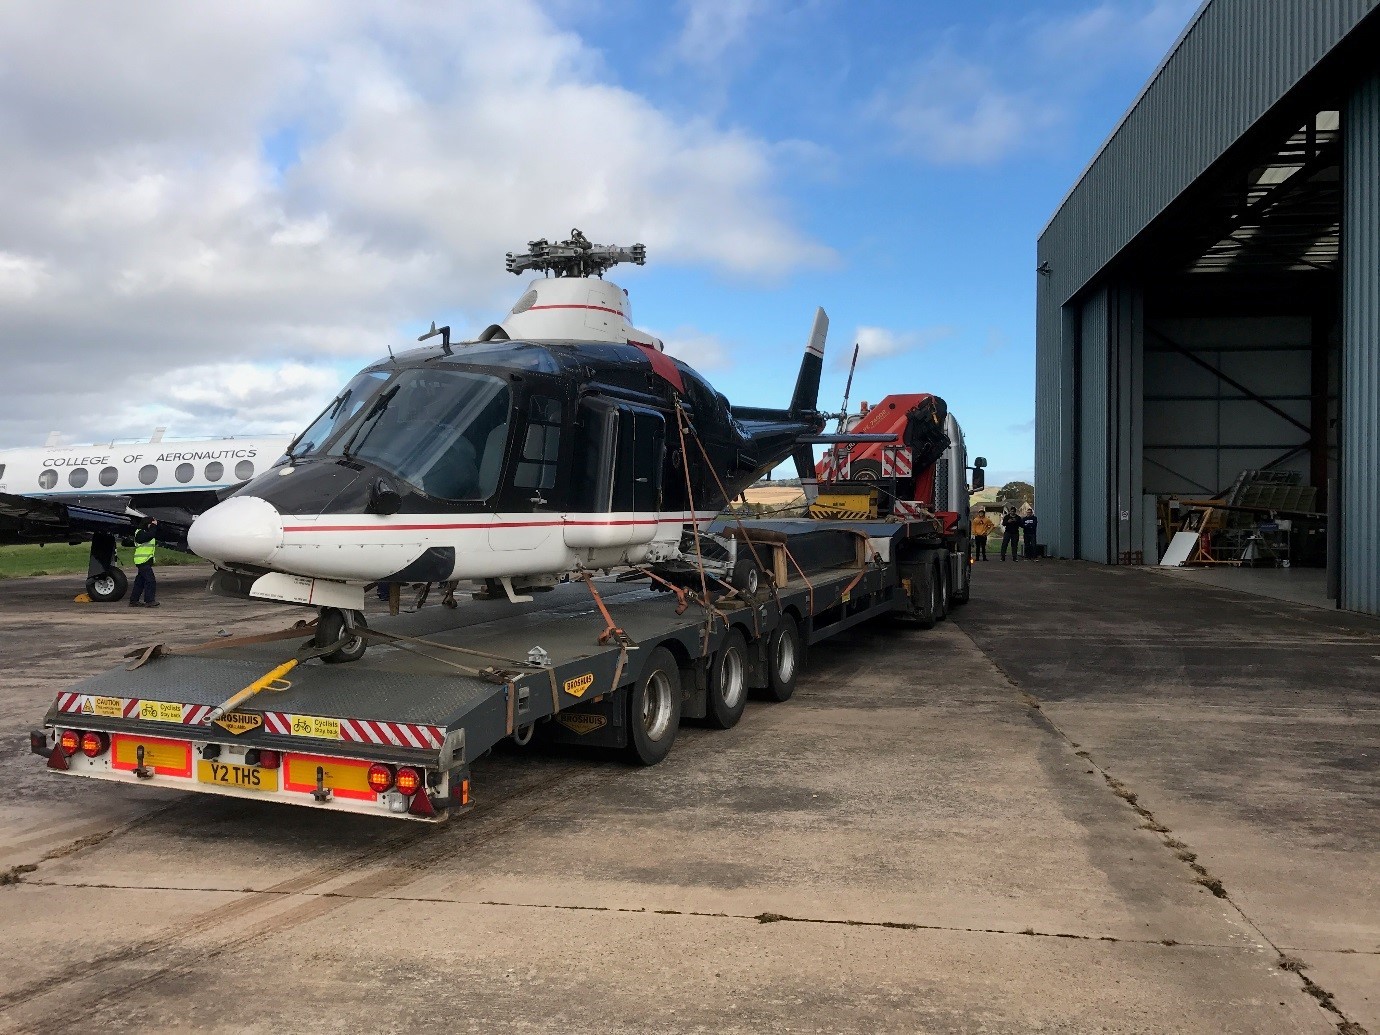 AST’s new helicopter, an Agusta 109, arrives at Perth Airport in Scone.